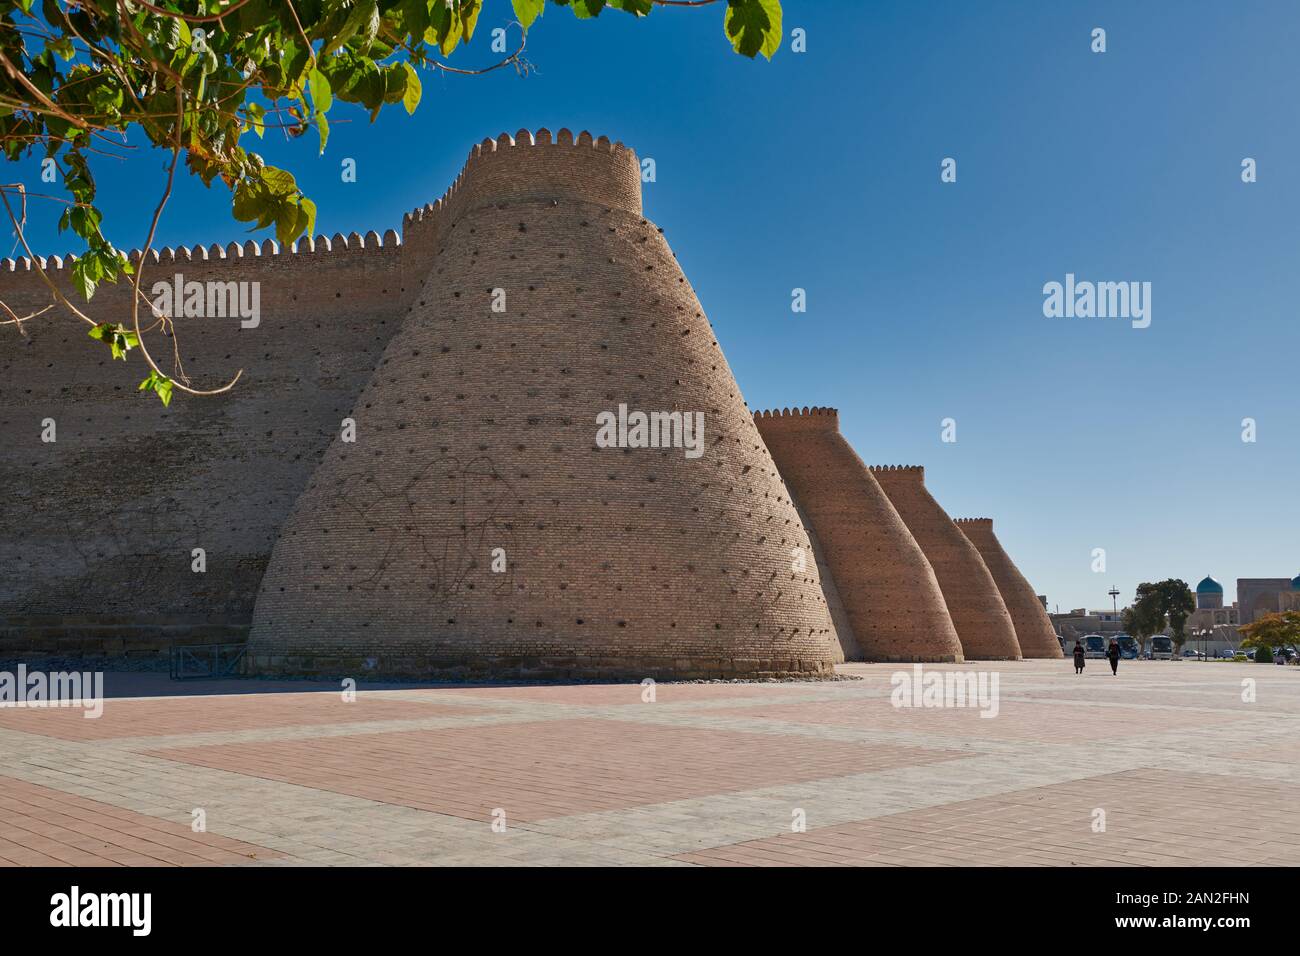 rampart of citadel and fortress The Ark, Bukhara, Uzbekistan, Central Asia Stock Photo